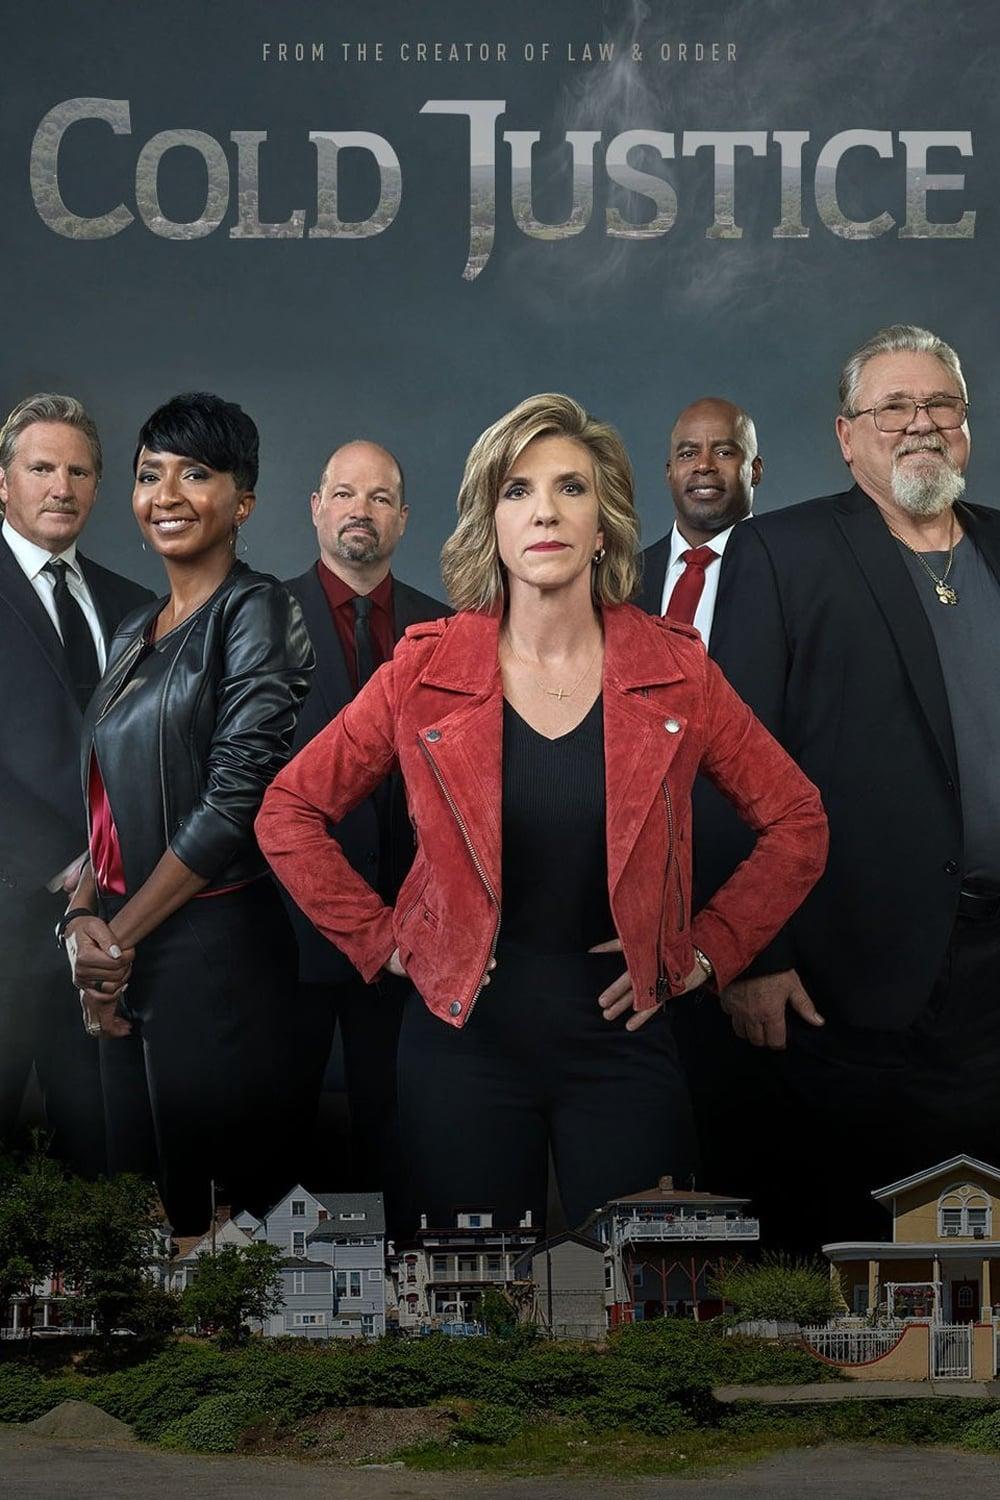 Cold Justice poster